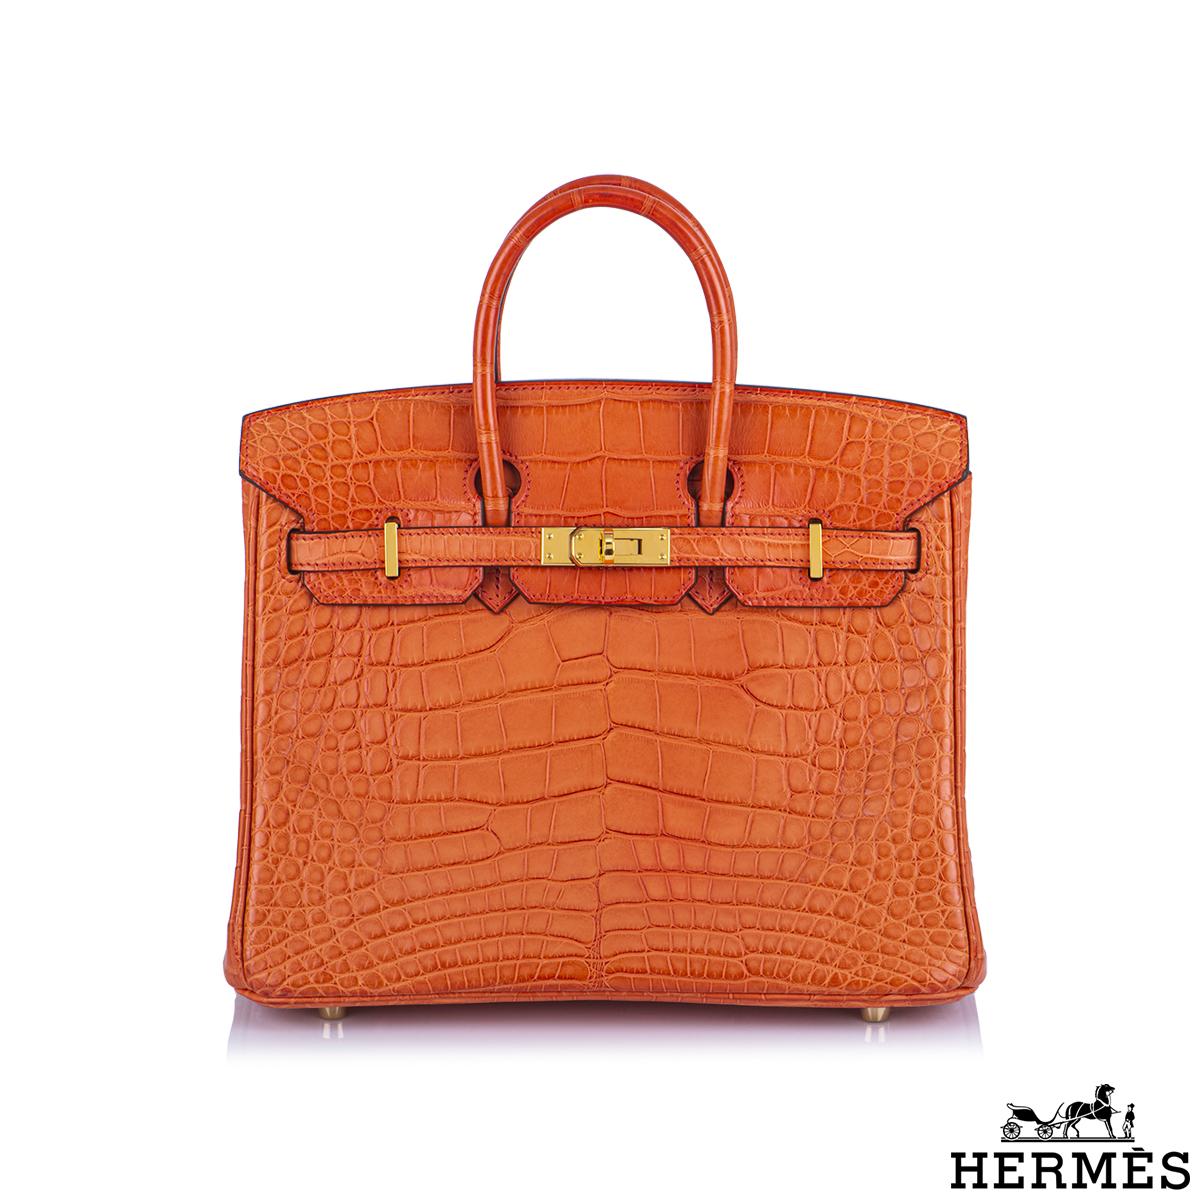 A Rare And Exquisite Hermès Birkin 25 cm bag. The exterior of this Birkin features an orange poppy alligator Mississippiensis leather with gold hardware. The exterior is complete with tonal stitching, two straps with front toggle closure and double